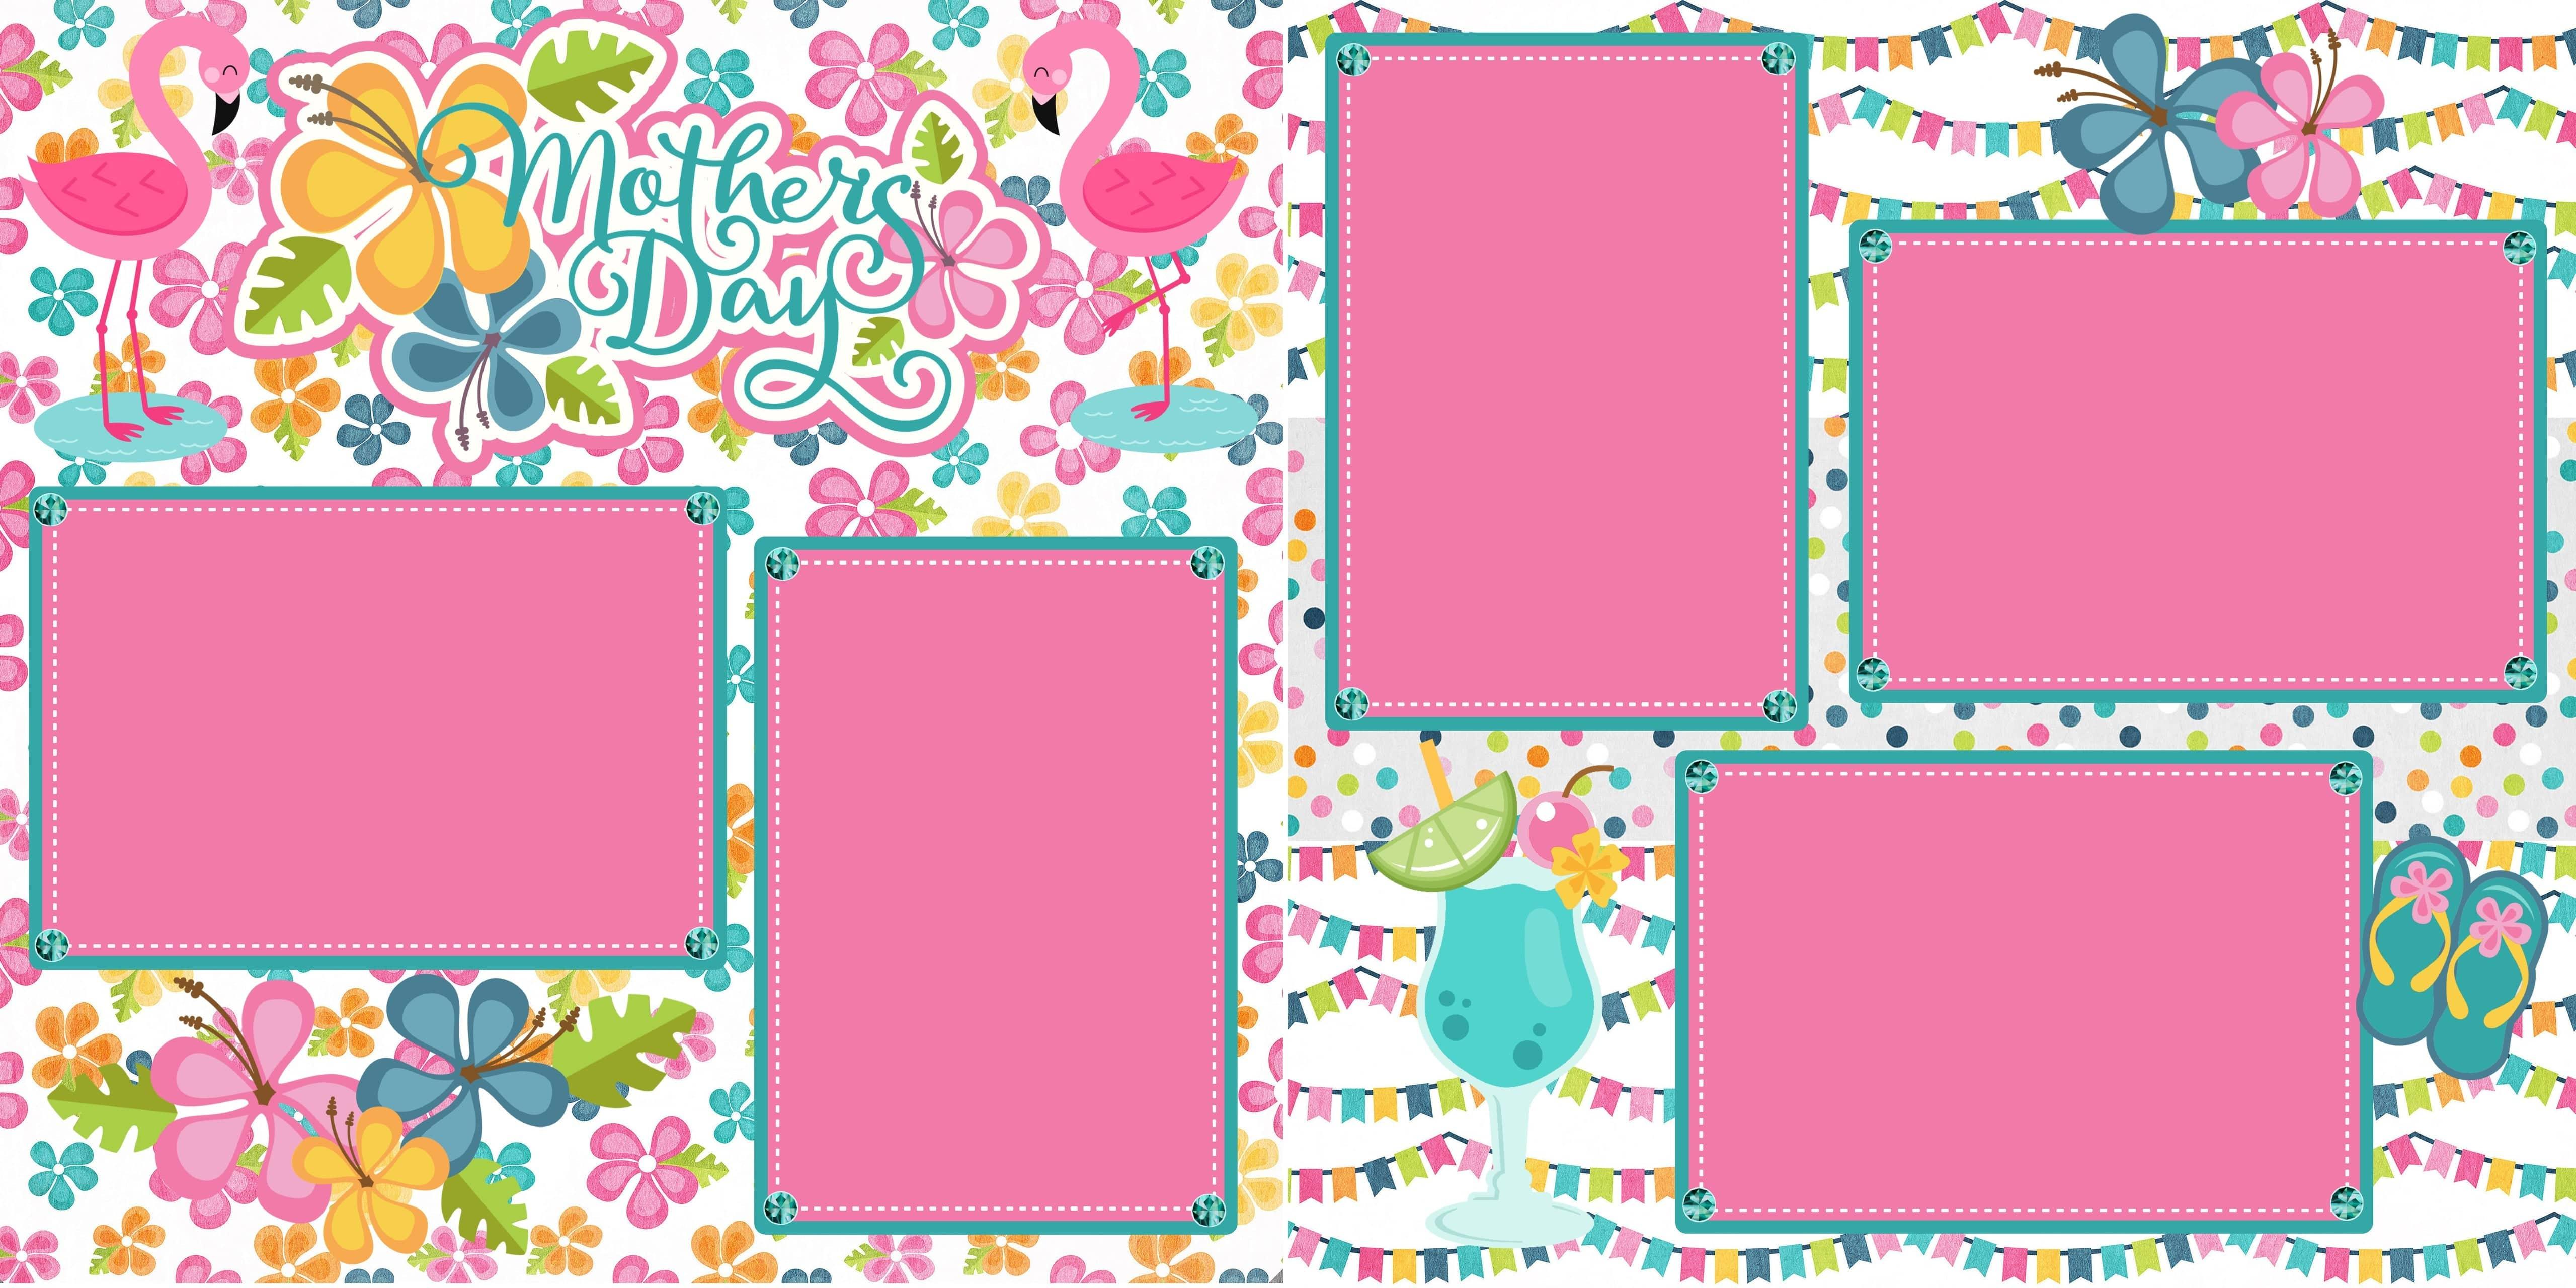 Tropical Mother's Day (2) - 12 x 12 Premade, Printed Scrapbook Pages by SSC Designs